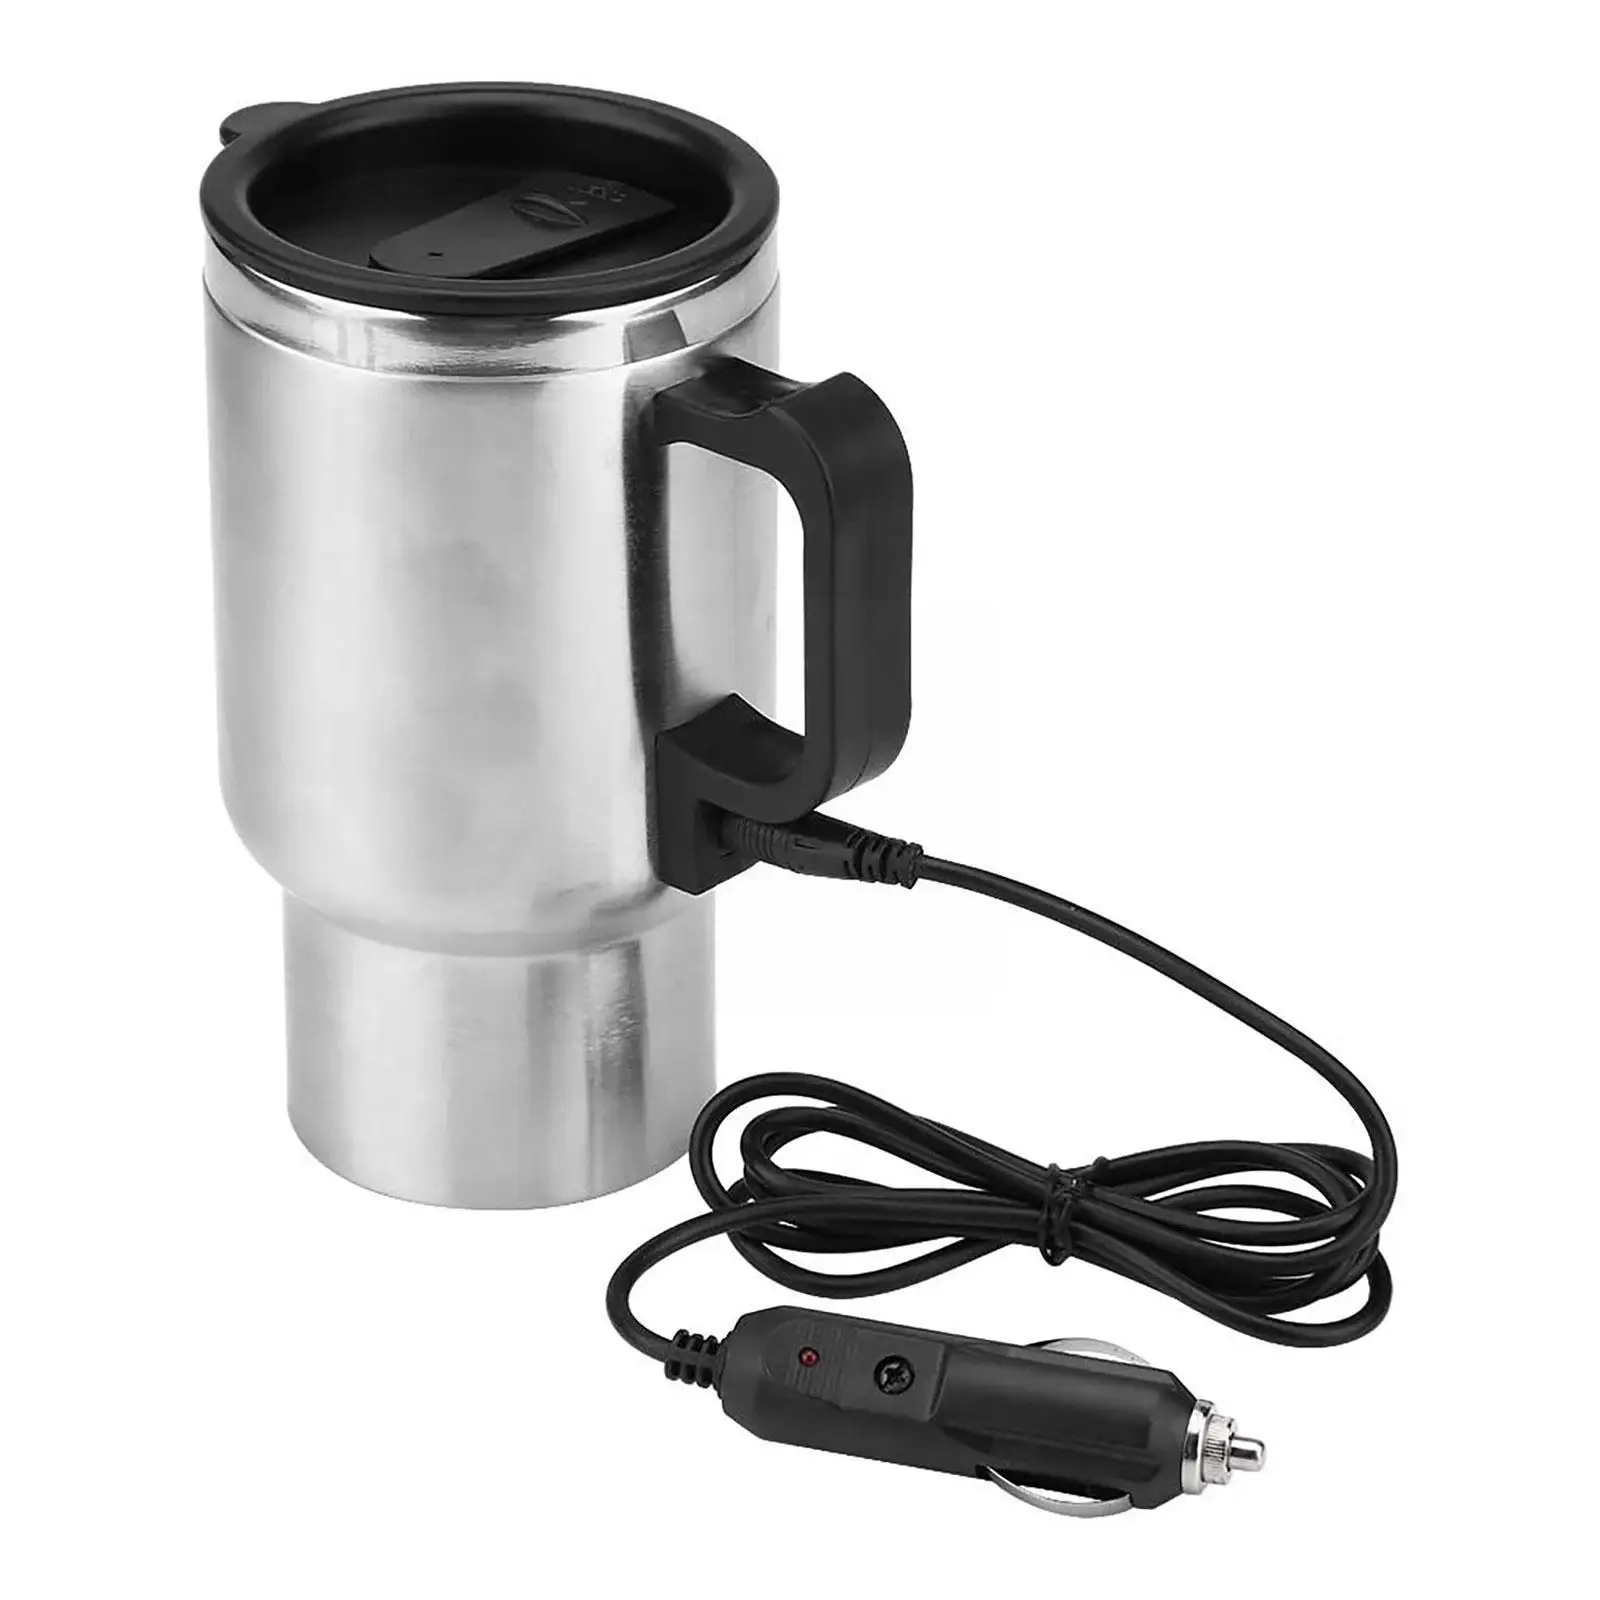 

500ML 12V Car Electric Heating Cup USB Heating Cup Water Heater Bottle Drink Mug Traveling Cup with Electric Heater Car Gadgets